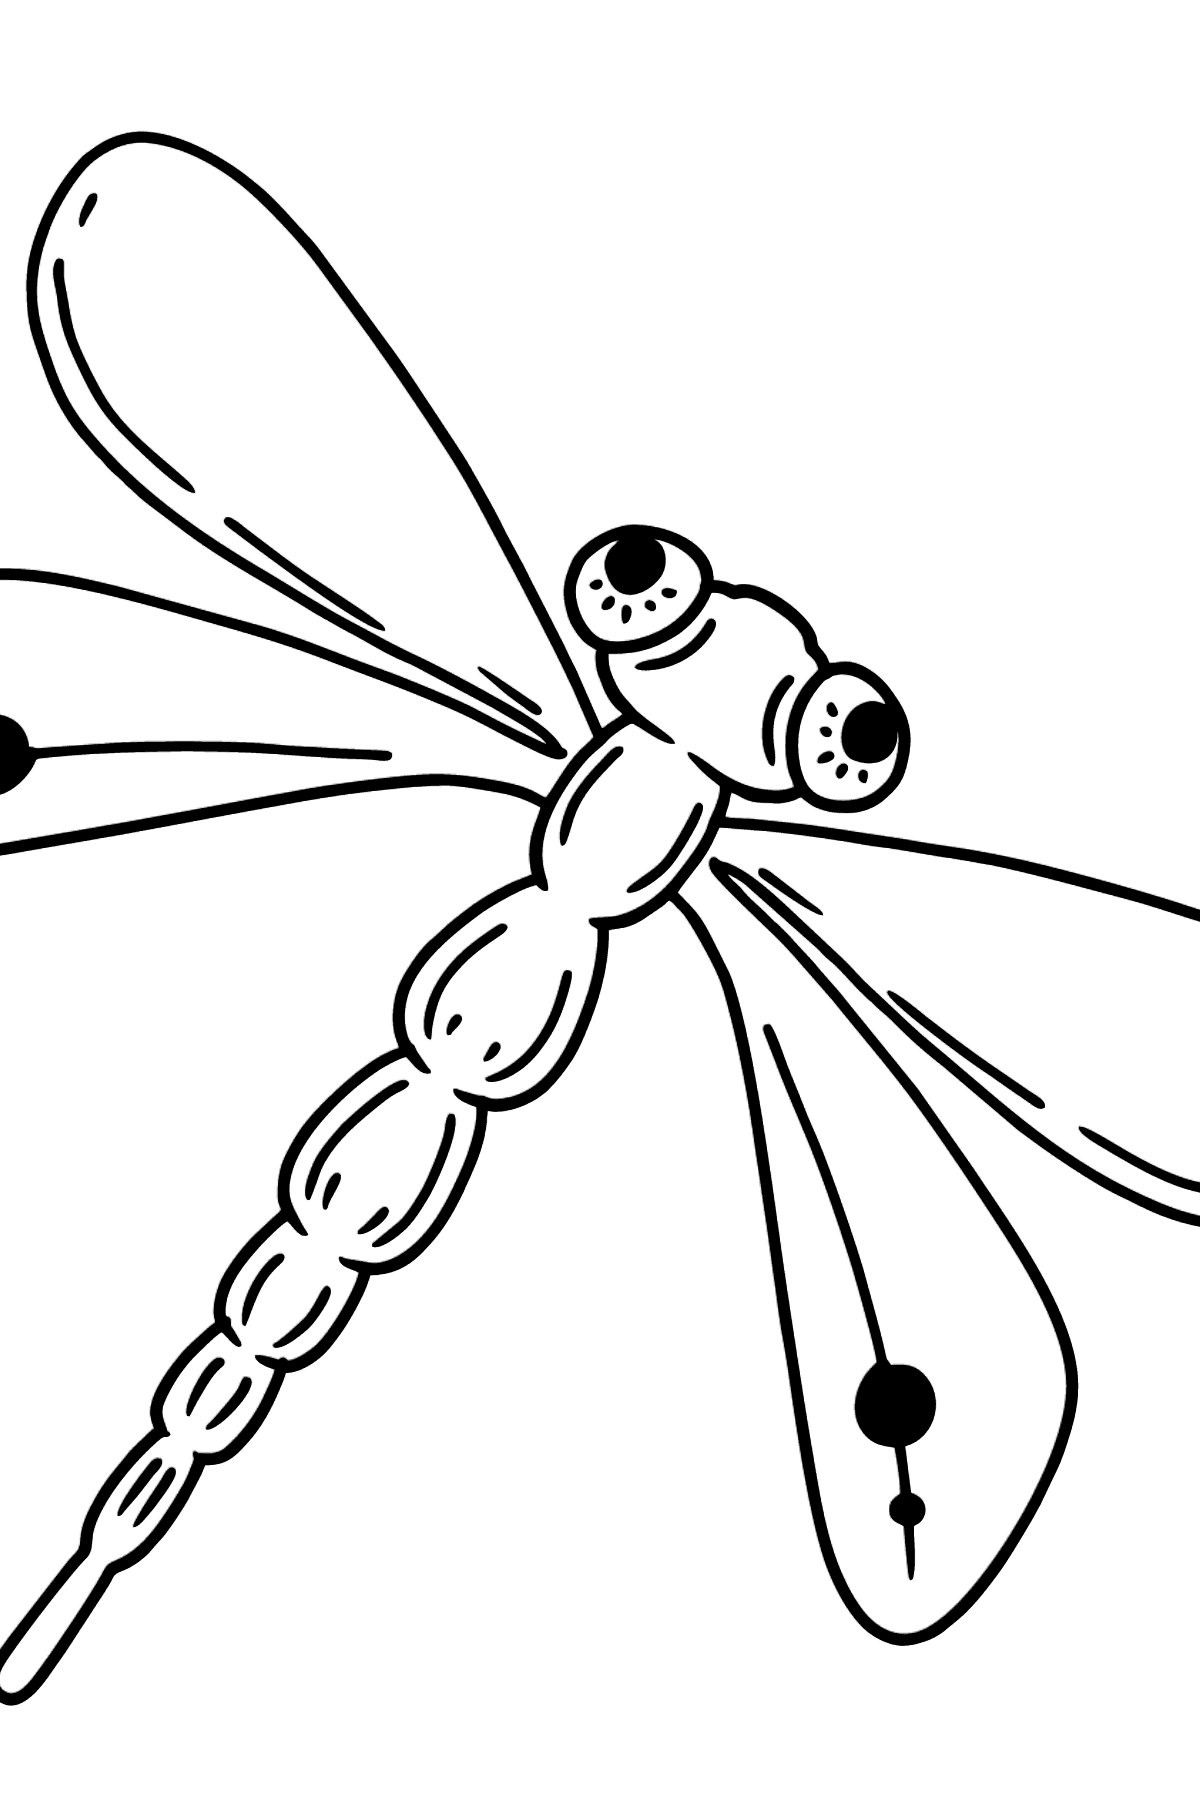 Dragonfly coloring page - Coloring Pages for Kids